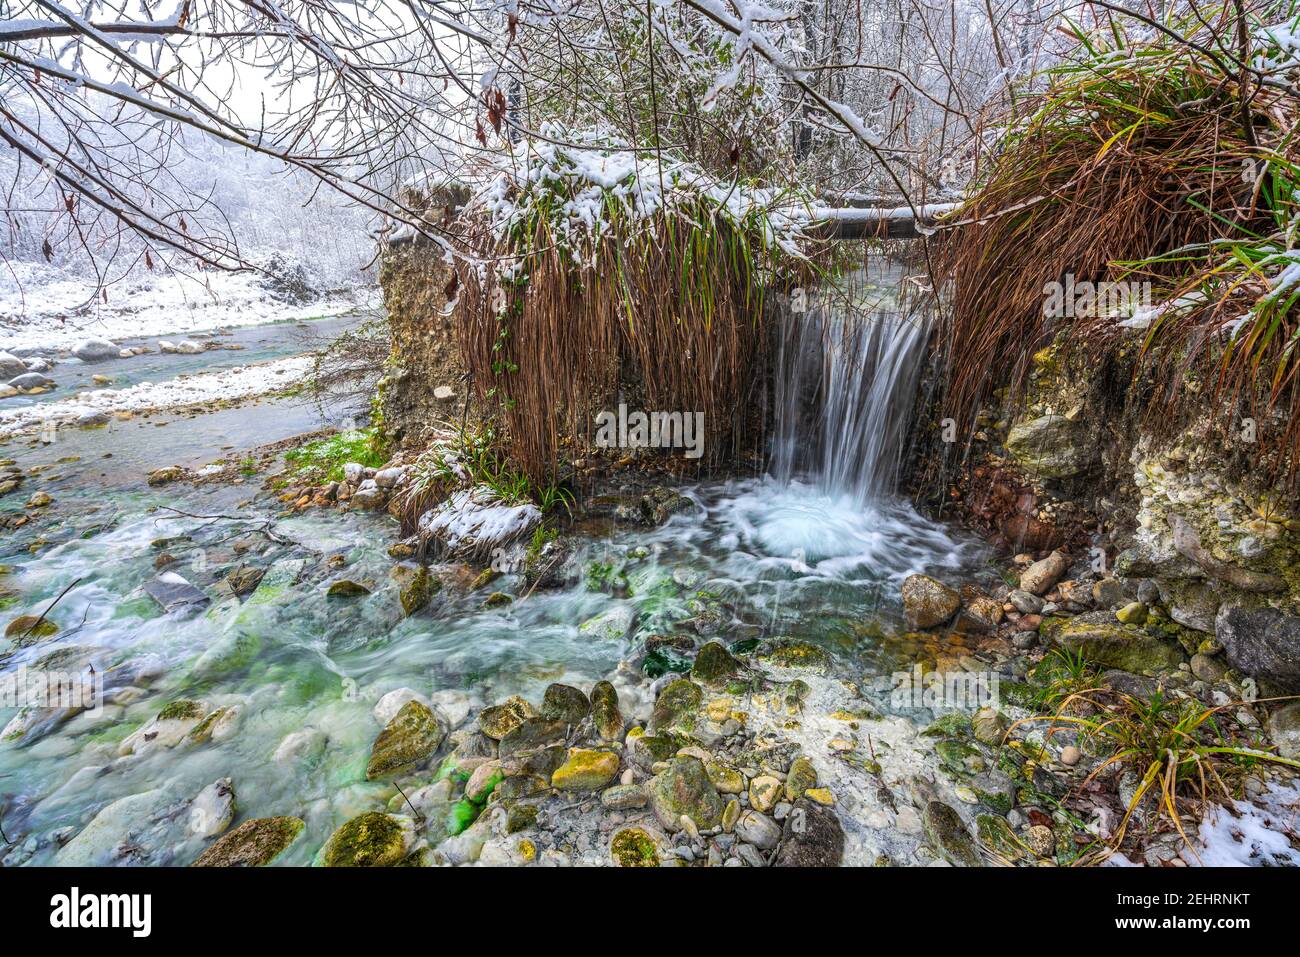 Waterfall of hot sulphurous water in a snowy landscape. Sources of the Lavino, Maiella National Park, Abruzzo Stock Photo